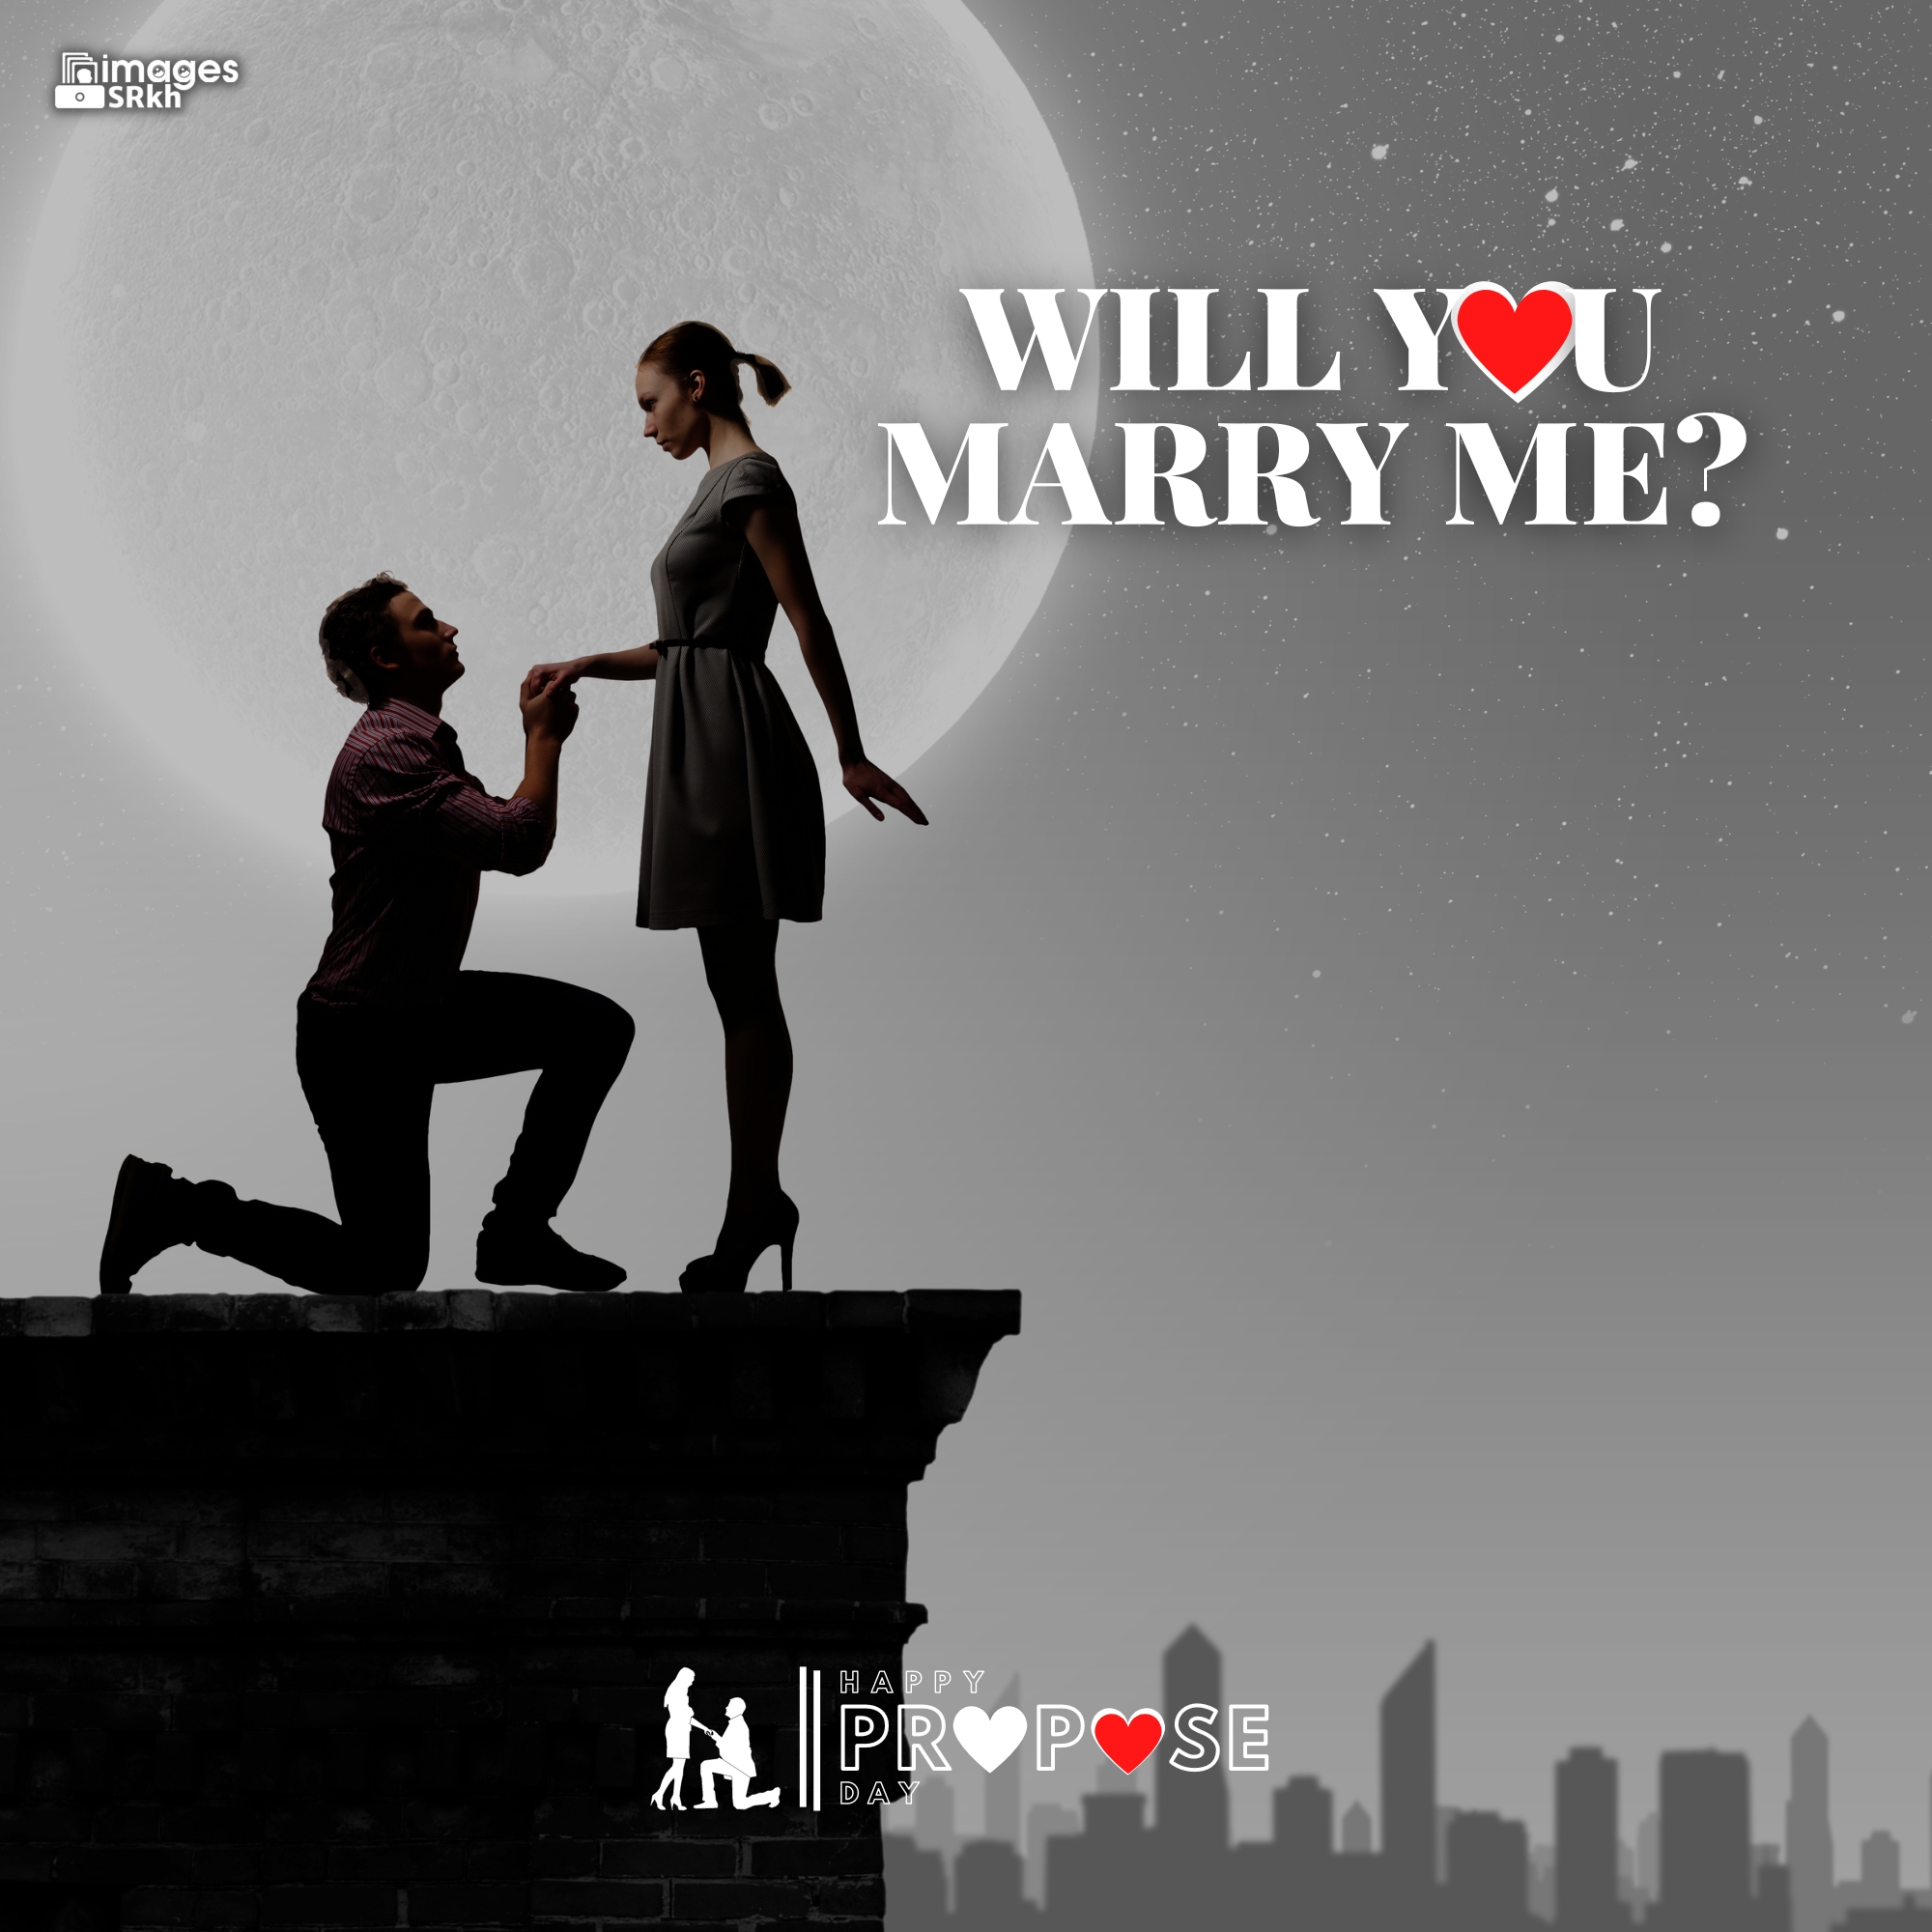 Propose Day Images | 292 | Will You MARRY ME